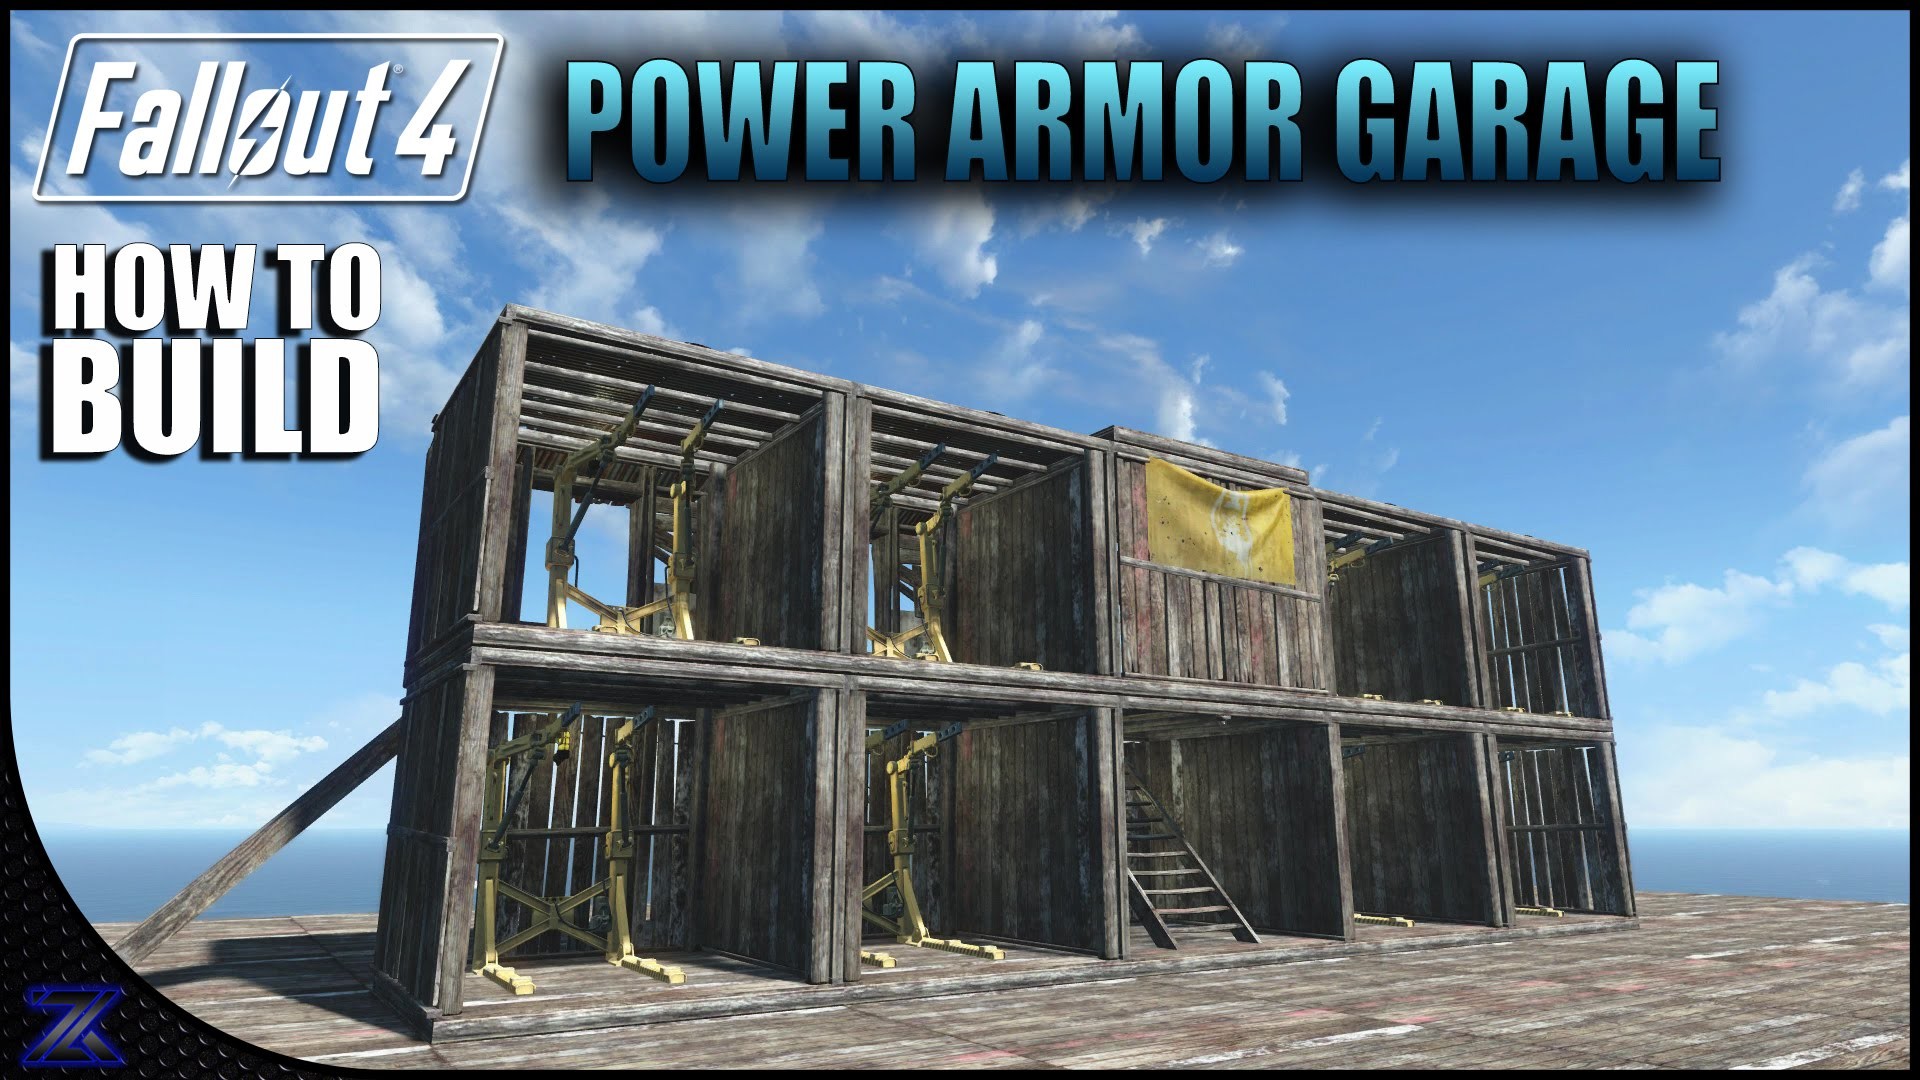 1920x1080 Fallout 4 - How to Build a Power Armor Garage | Settlement Building Ideas -  YouTube